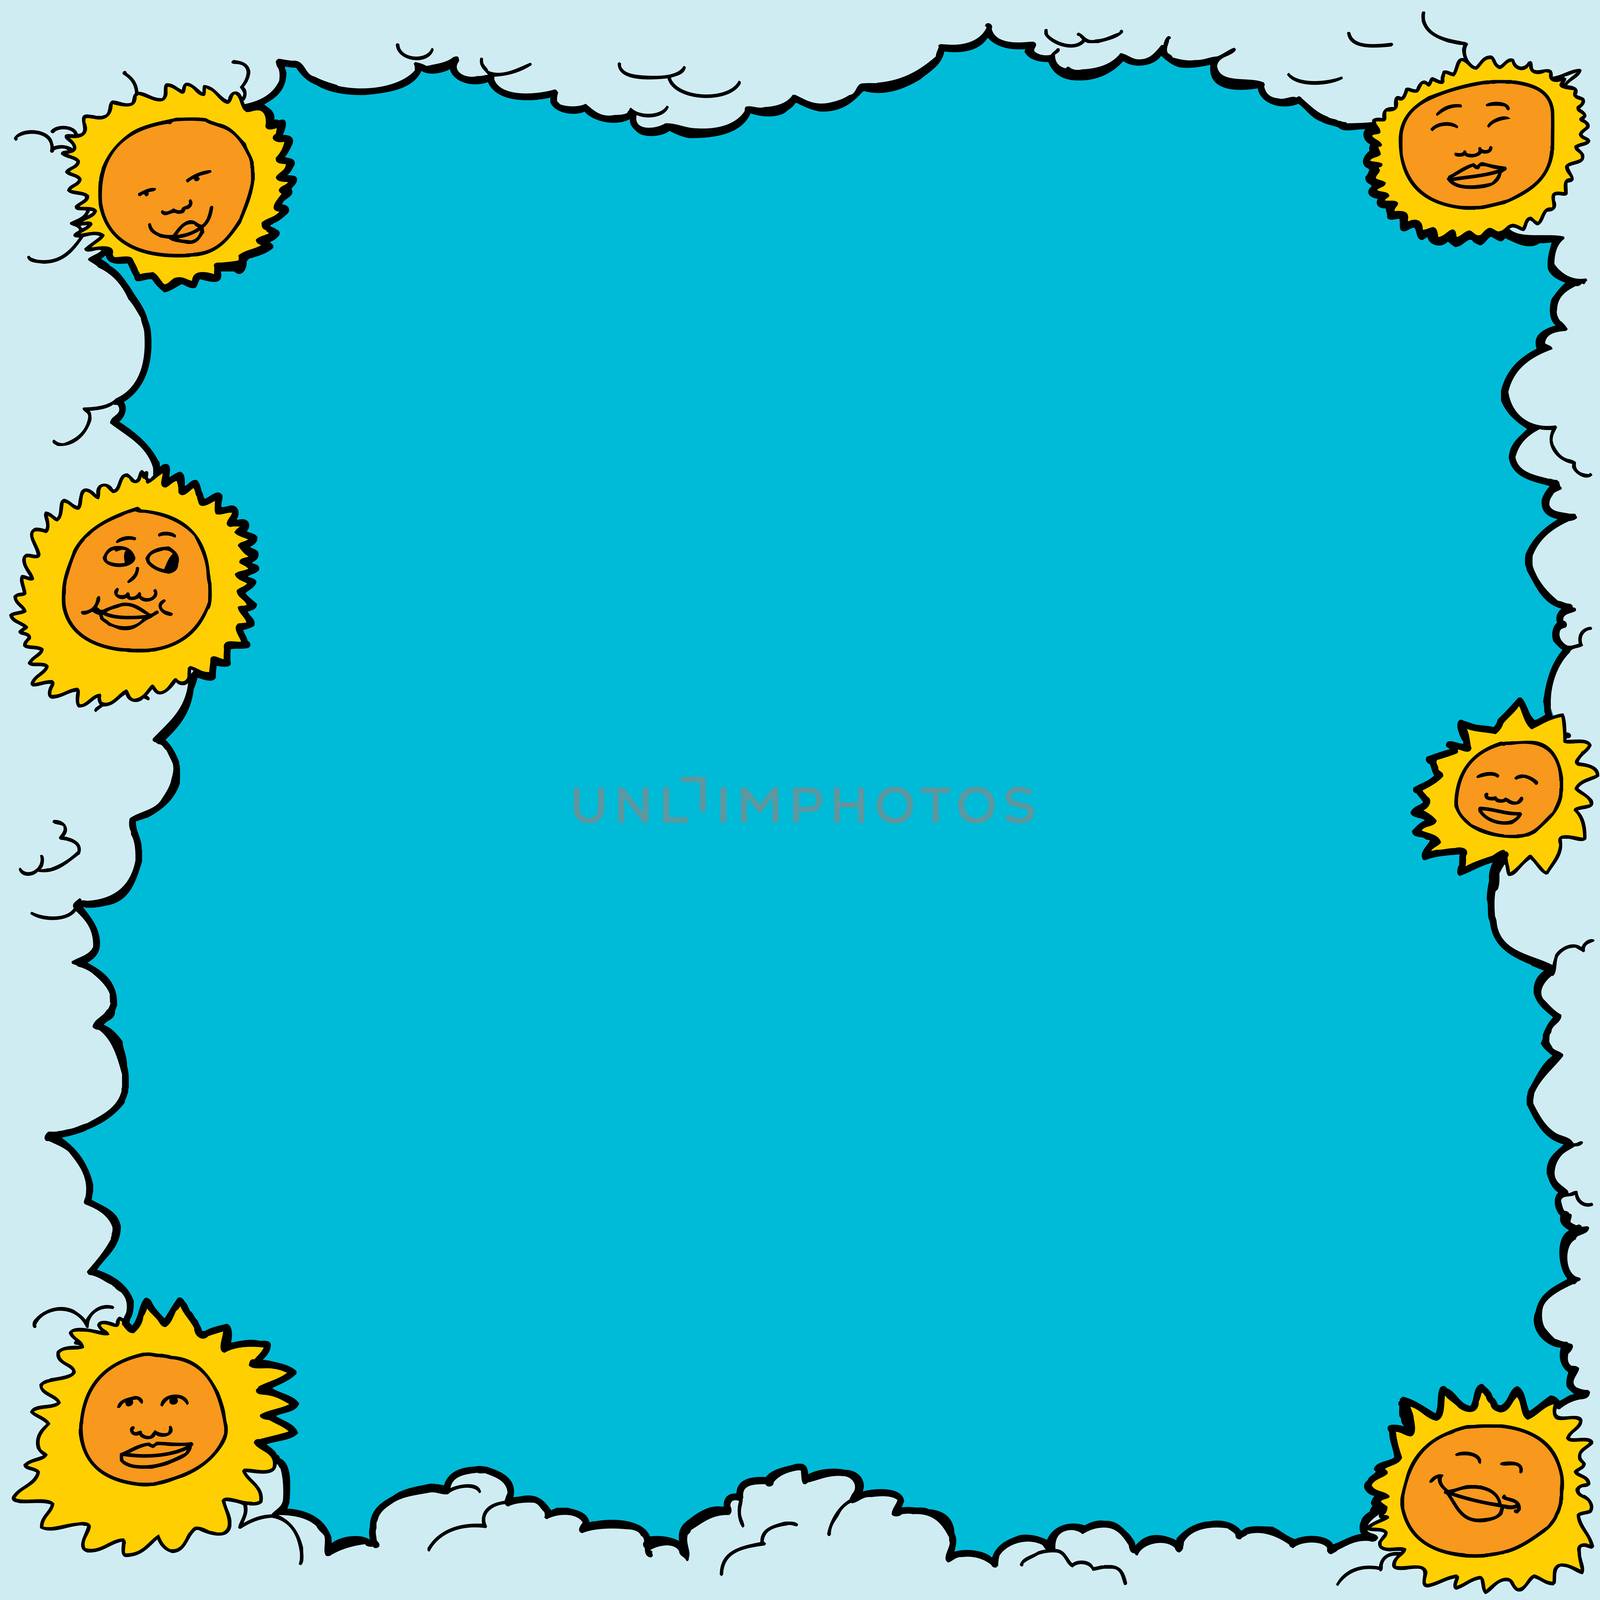 Hand drawn smiling suns with cloudy border